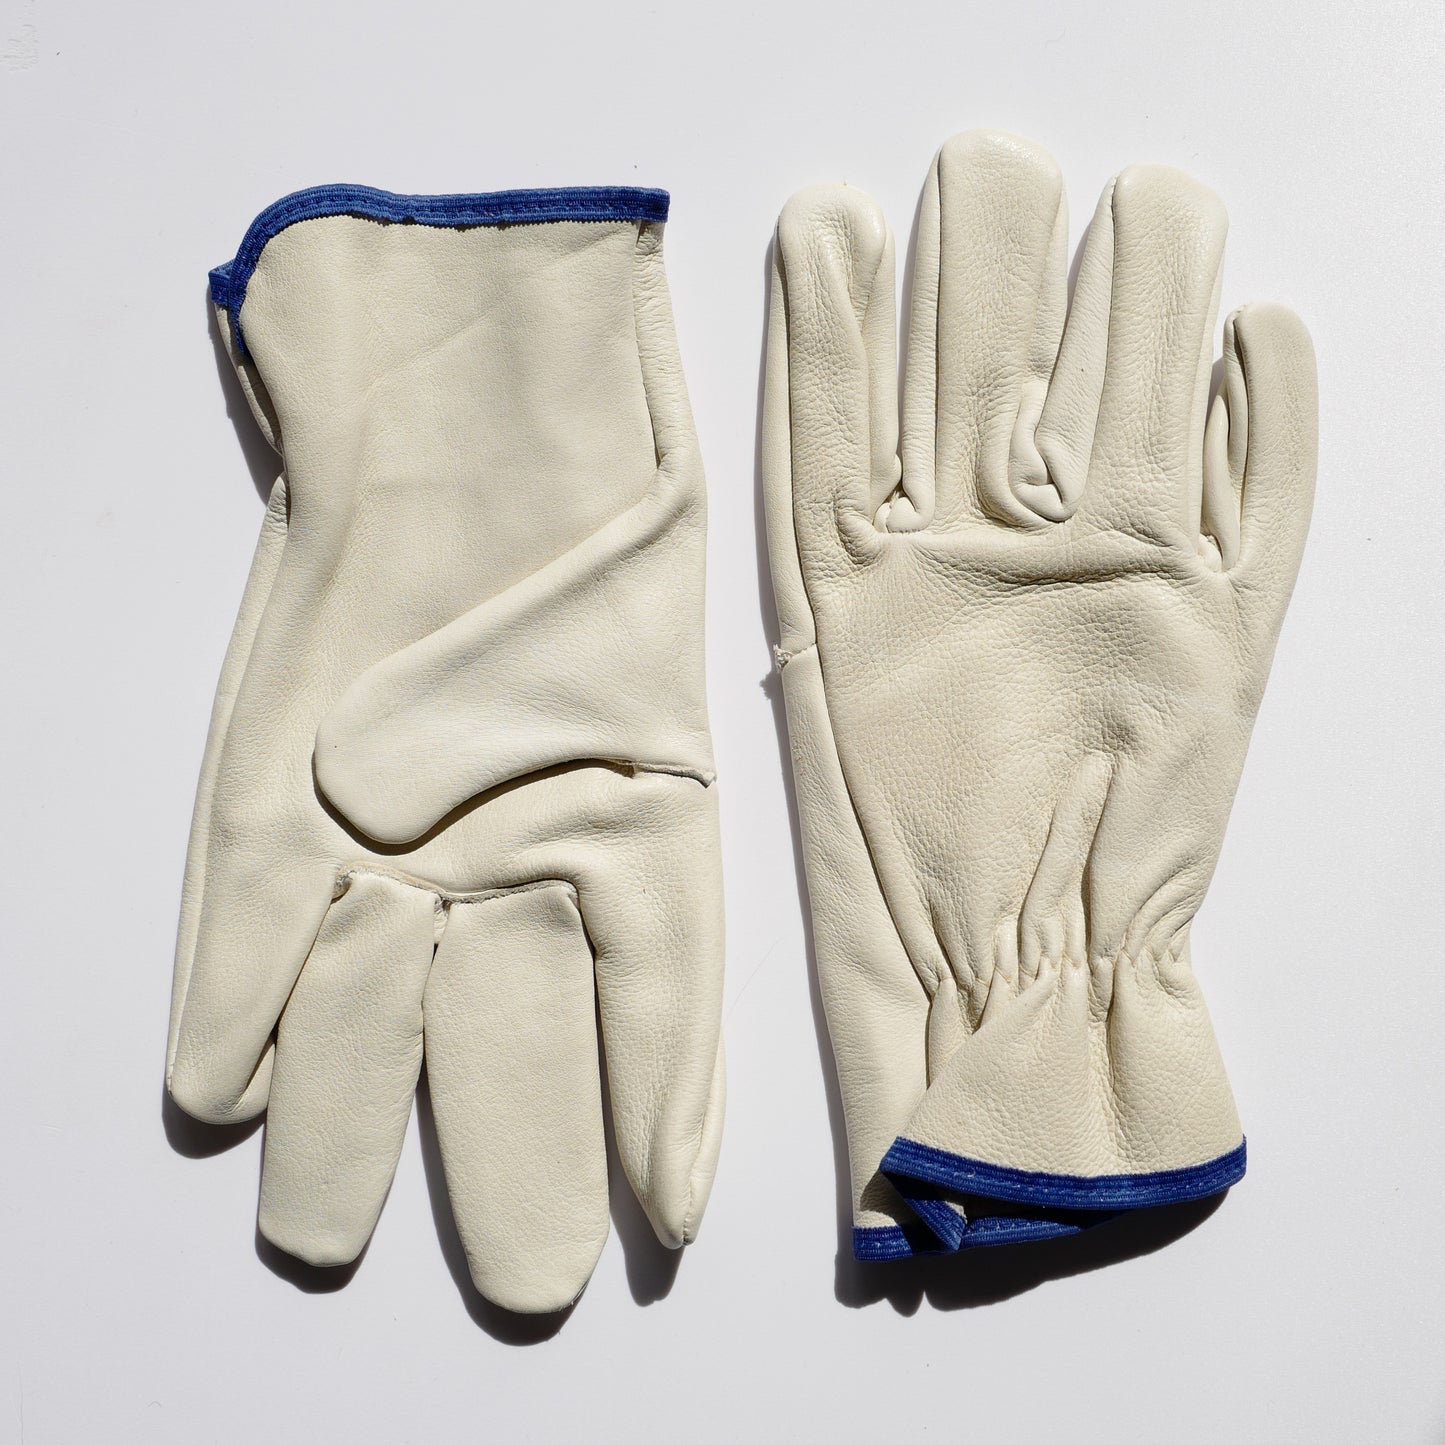 Unlined Leather Gardening Gloves